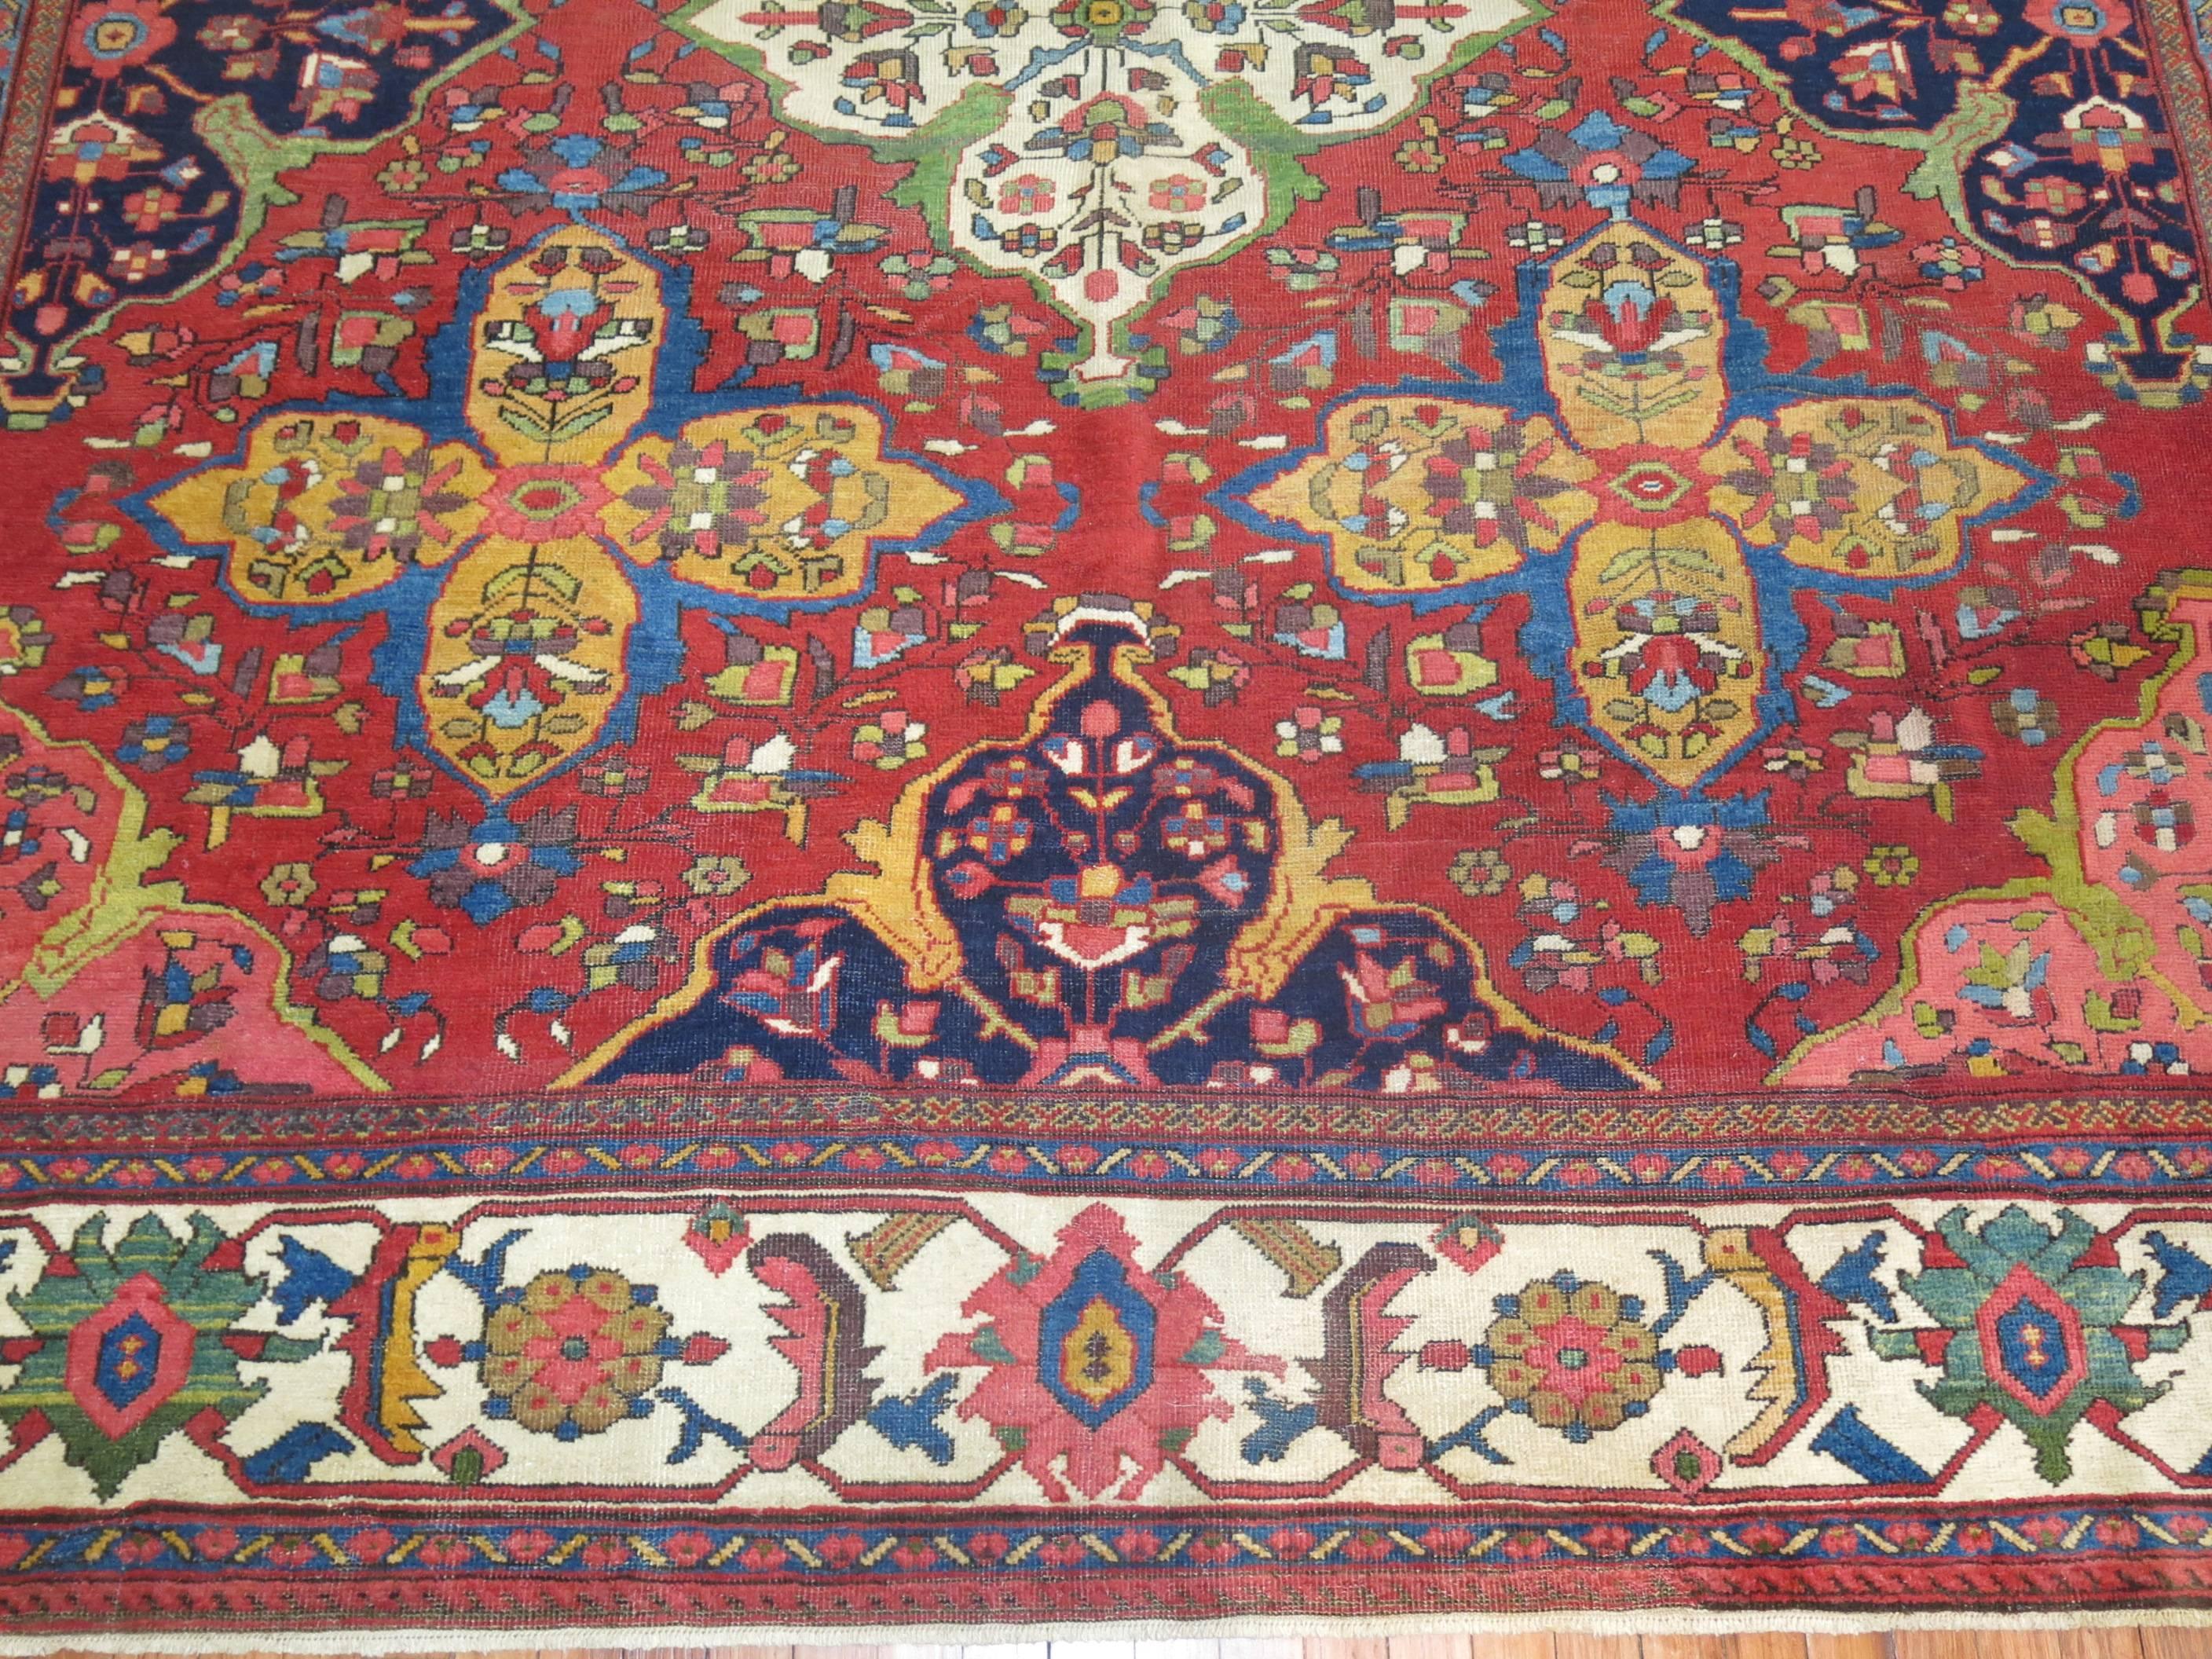 Rich colored Persian Ferehan rug with bold large scale all-over motif. Great rug to start a room around. If you appreciate and old antique rug and the beauty and craftsmanship then this could very well be the one!

Measures: 9' x 12'2